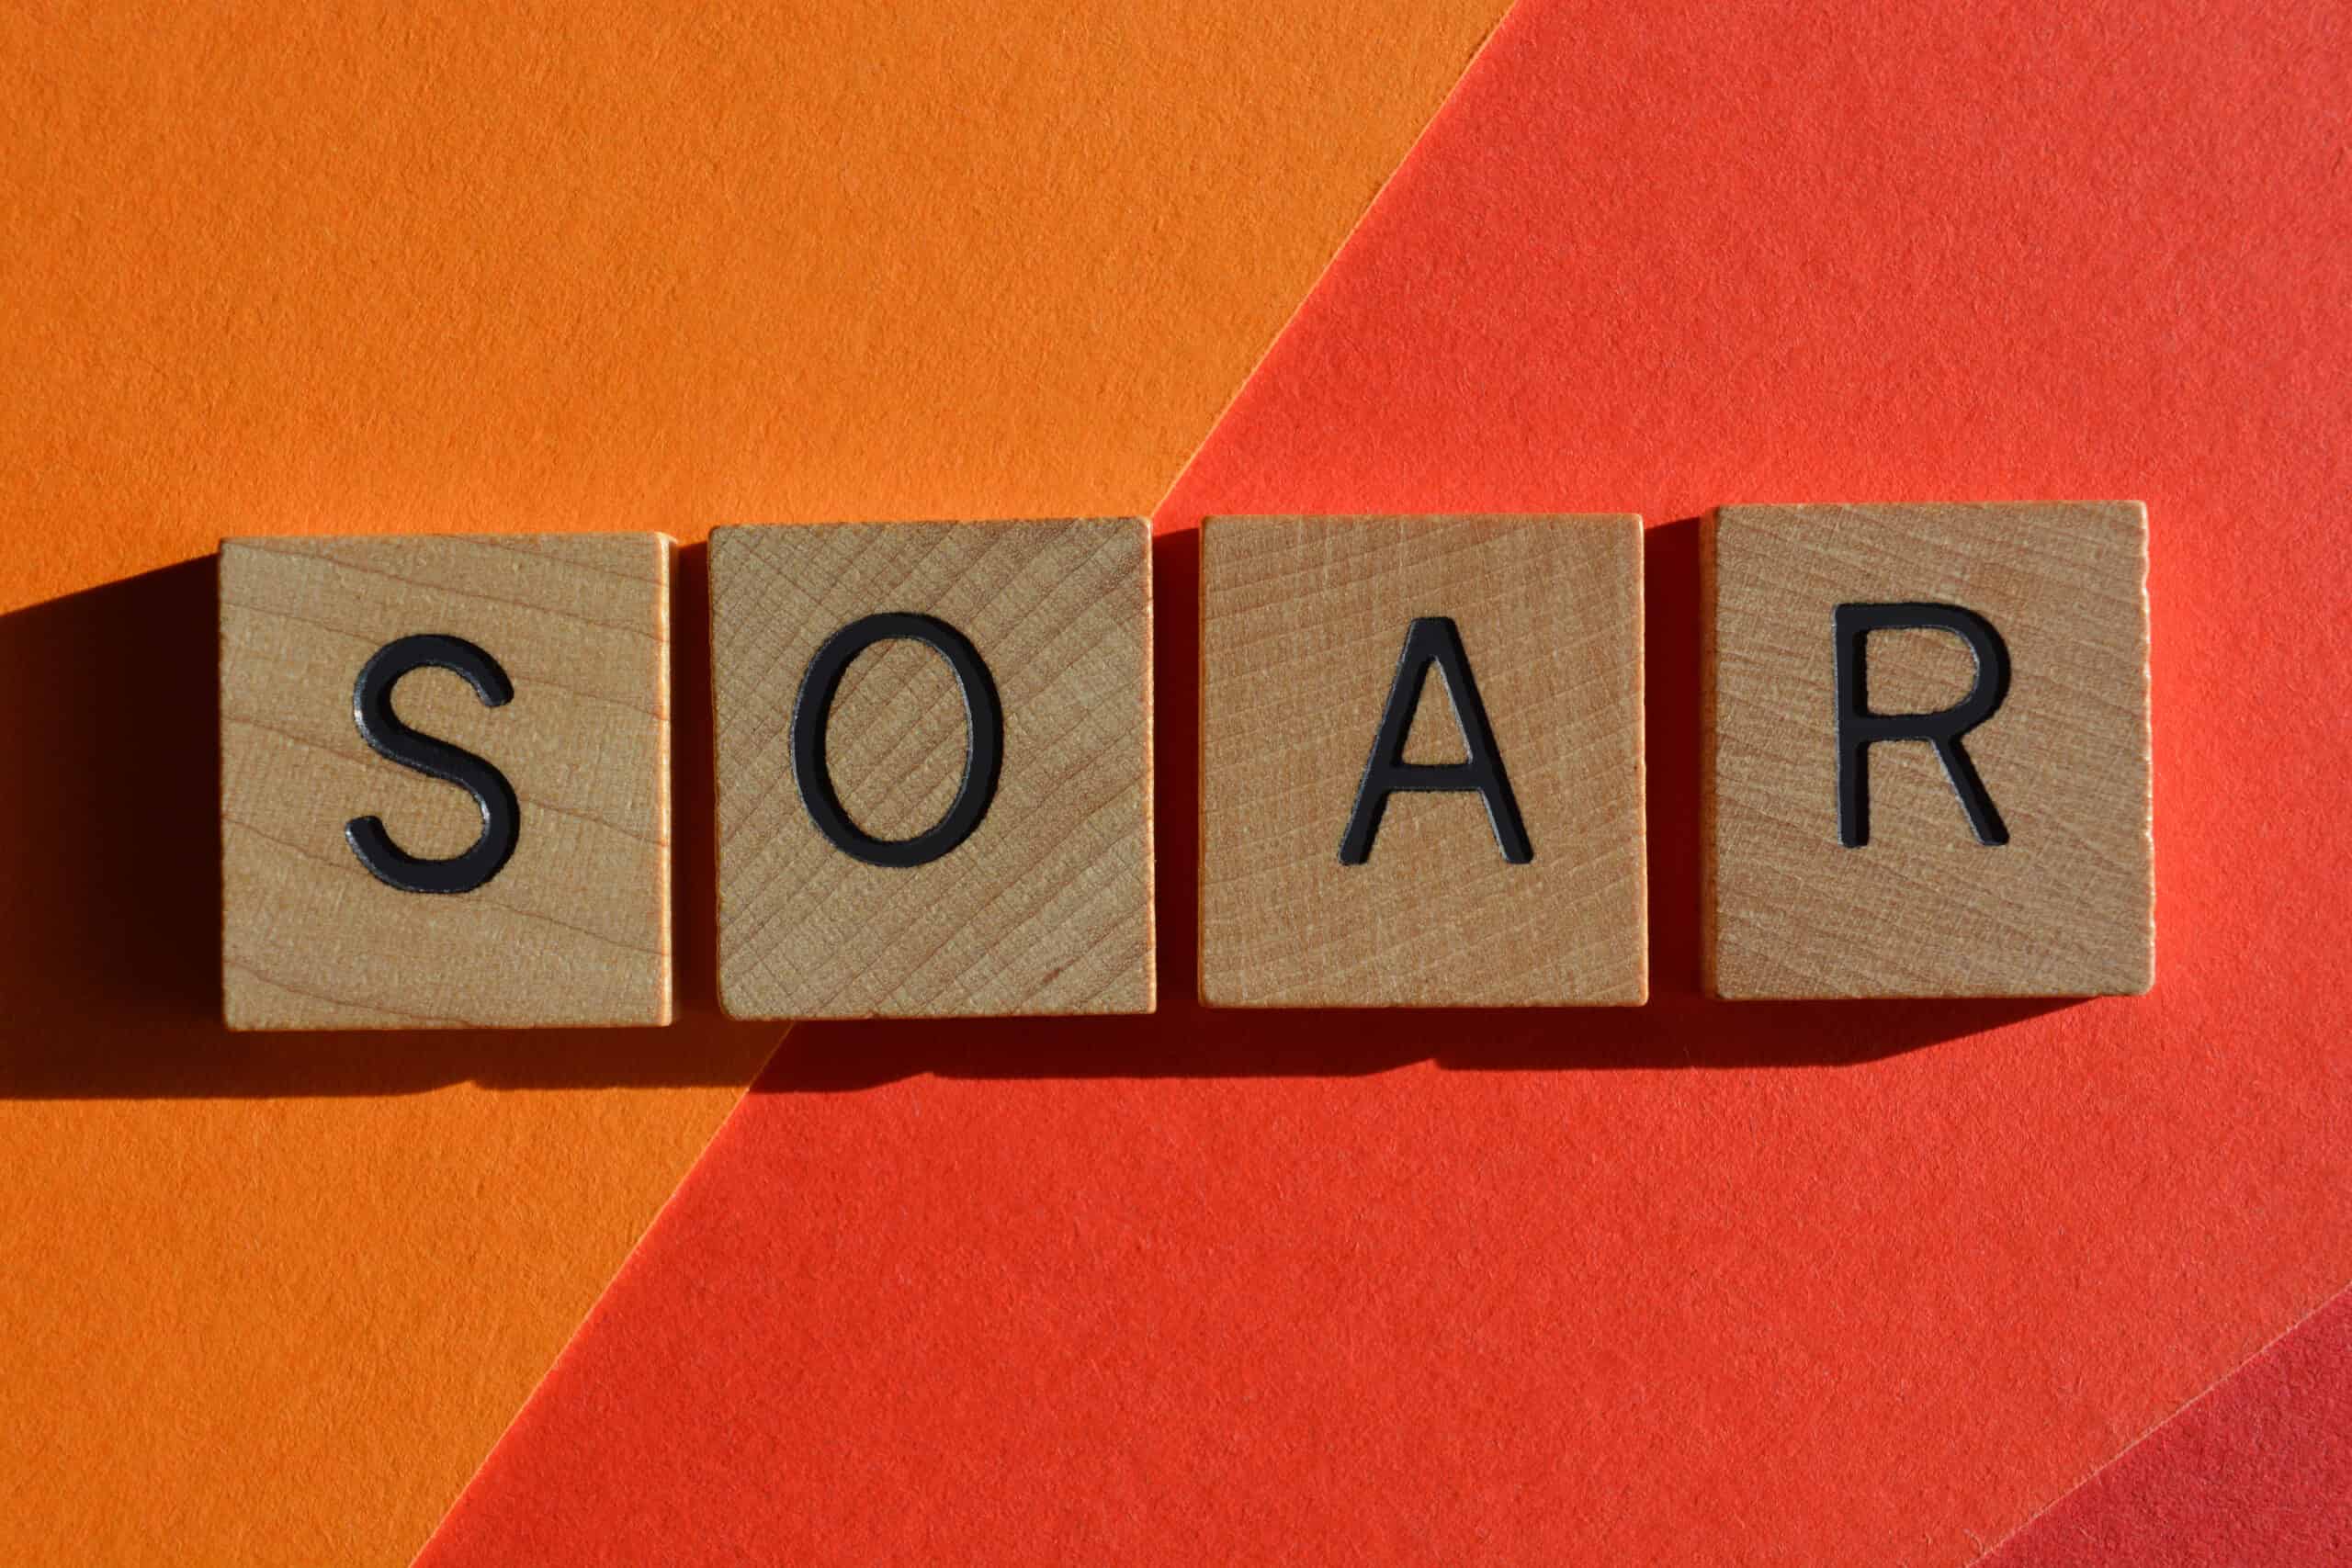 Scrabble letters spell out SOAR on a red and orange background for basically no reason.